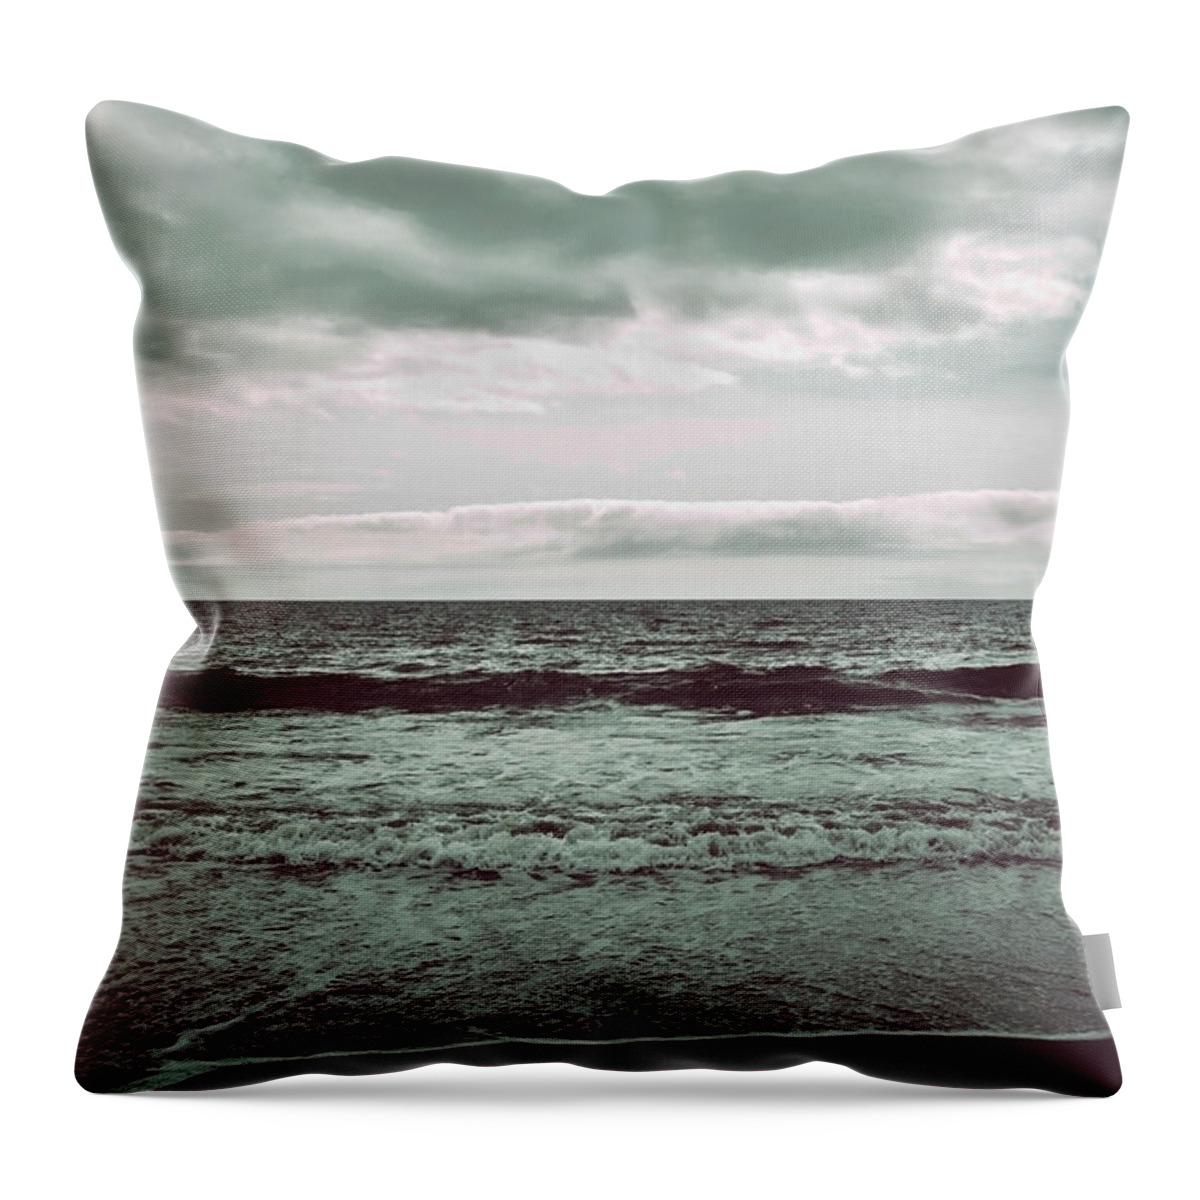 Aptos Throw Pillow featuring the photograph As My Heart is Being Crushed by Laurie Search